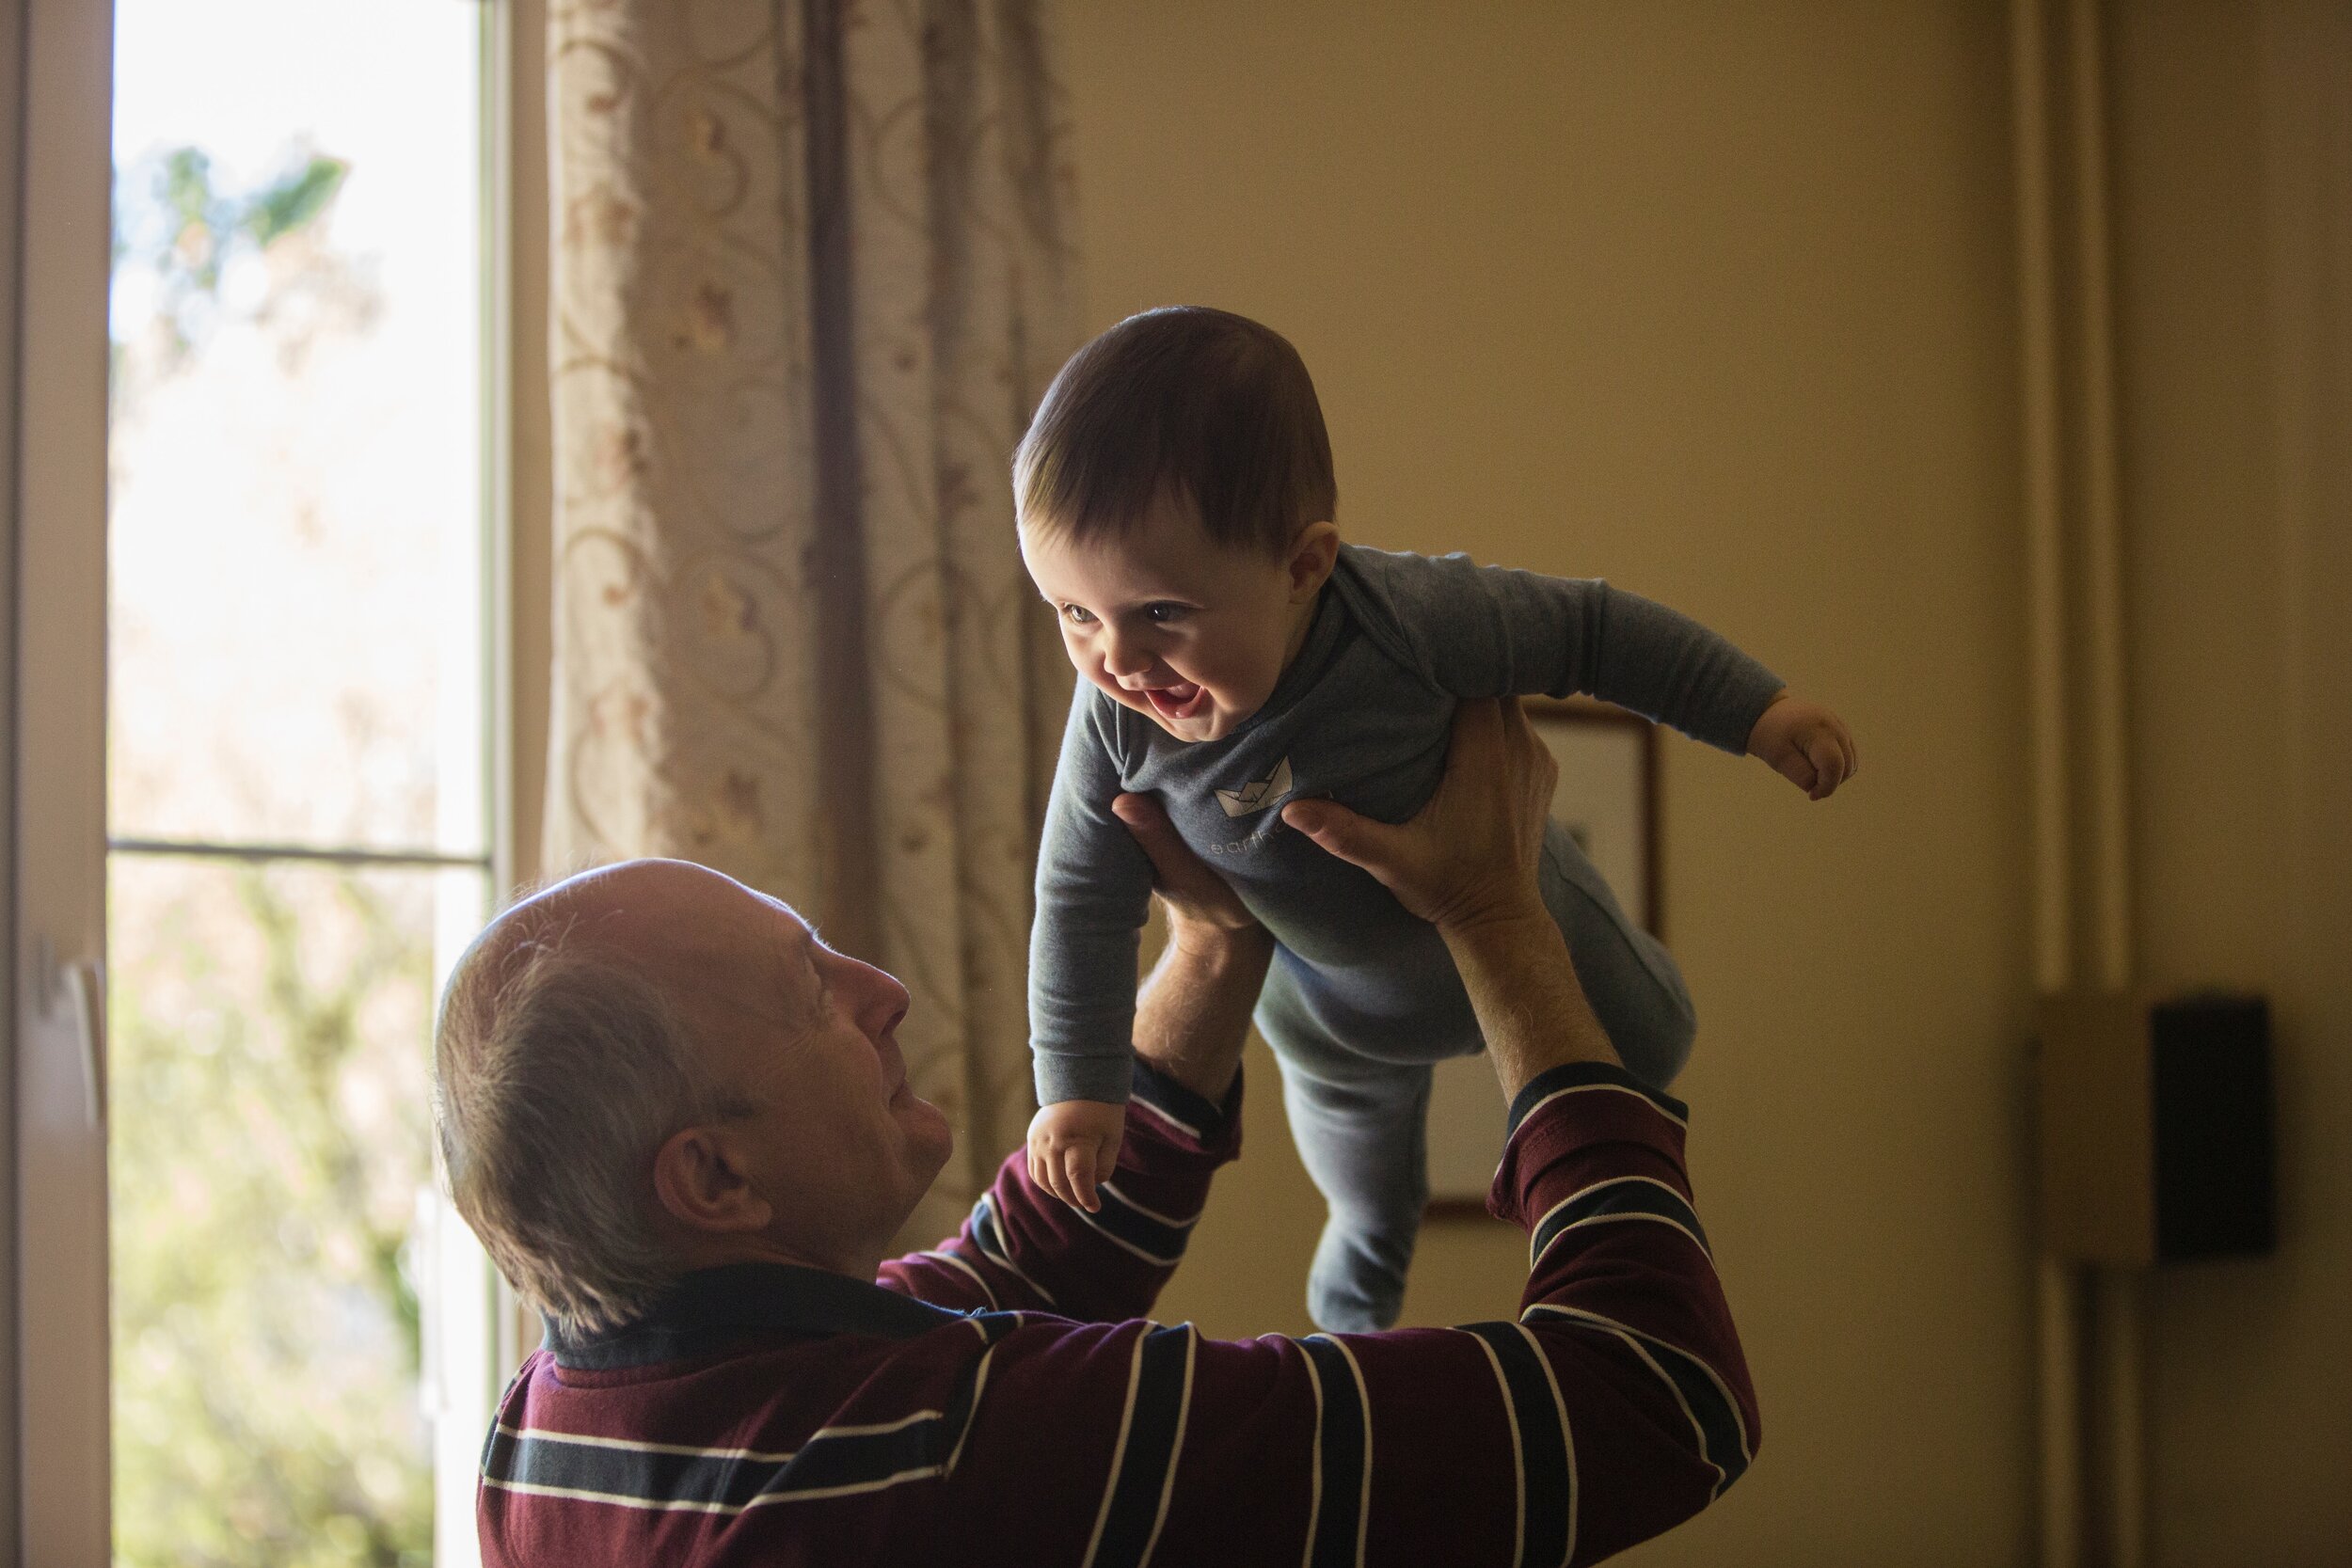 It’s common for Spanish grandparents to step in whenever parents need childcare.